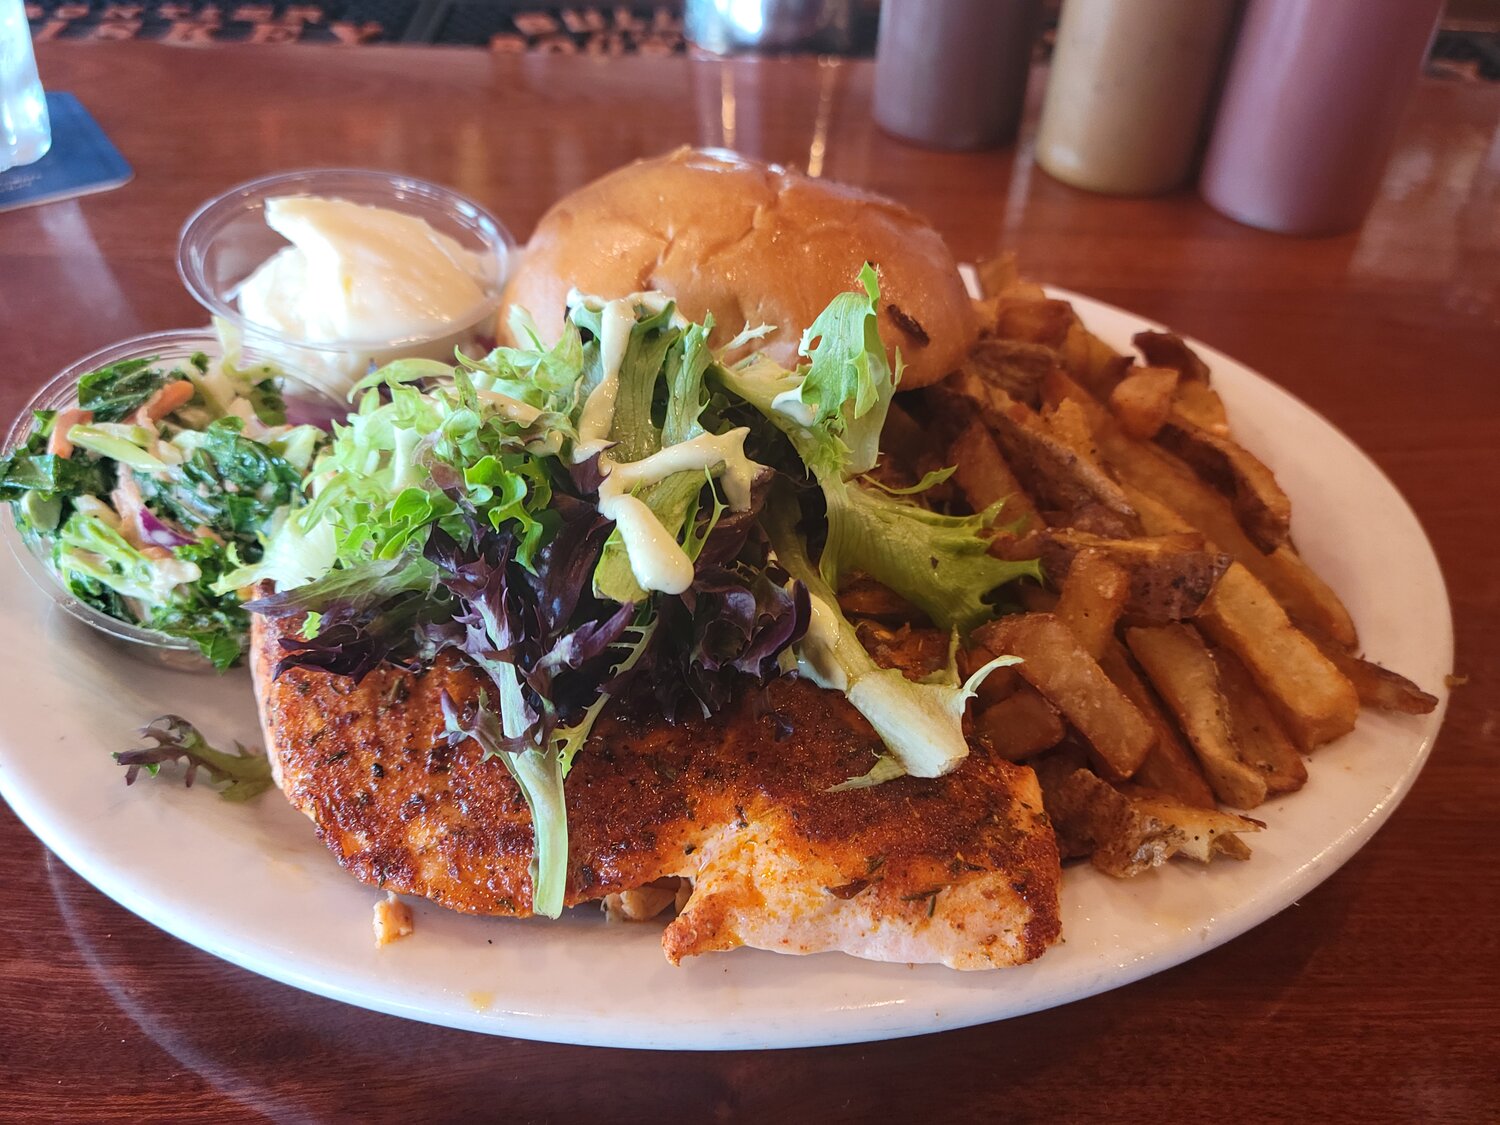 The blackened salmon sandwich is served with a side of coleslaw and topped with fresh greens and a cilantro crema.